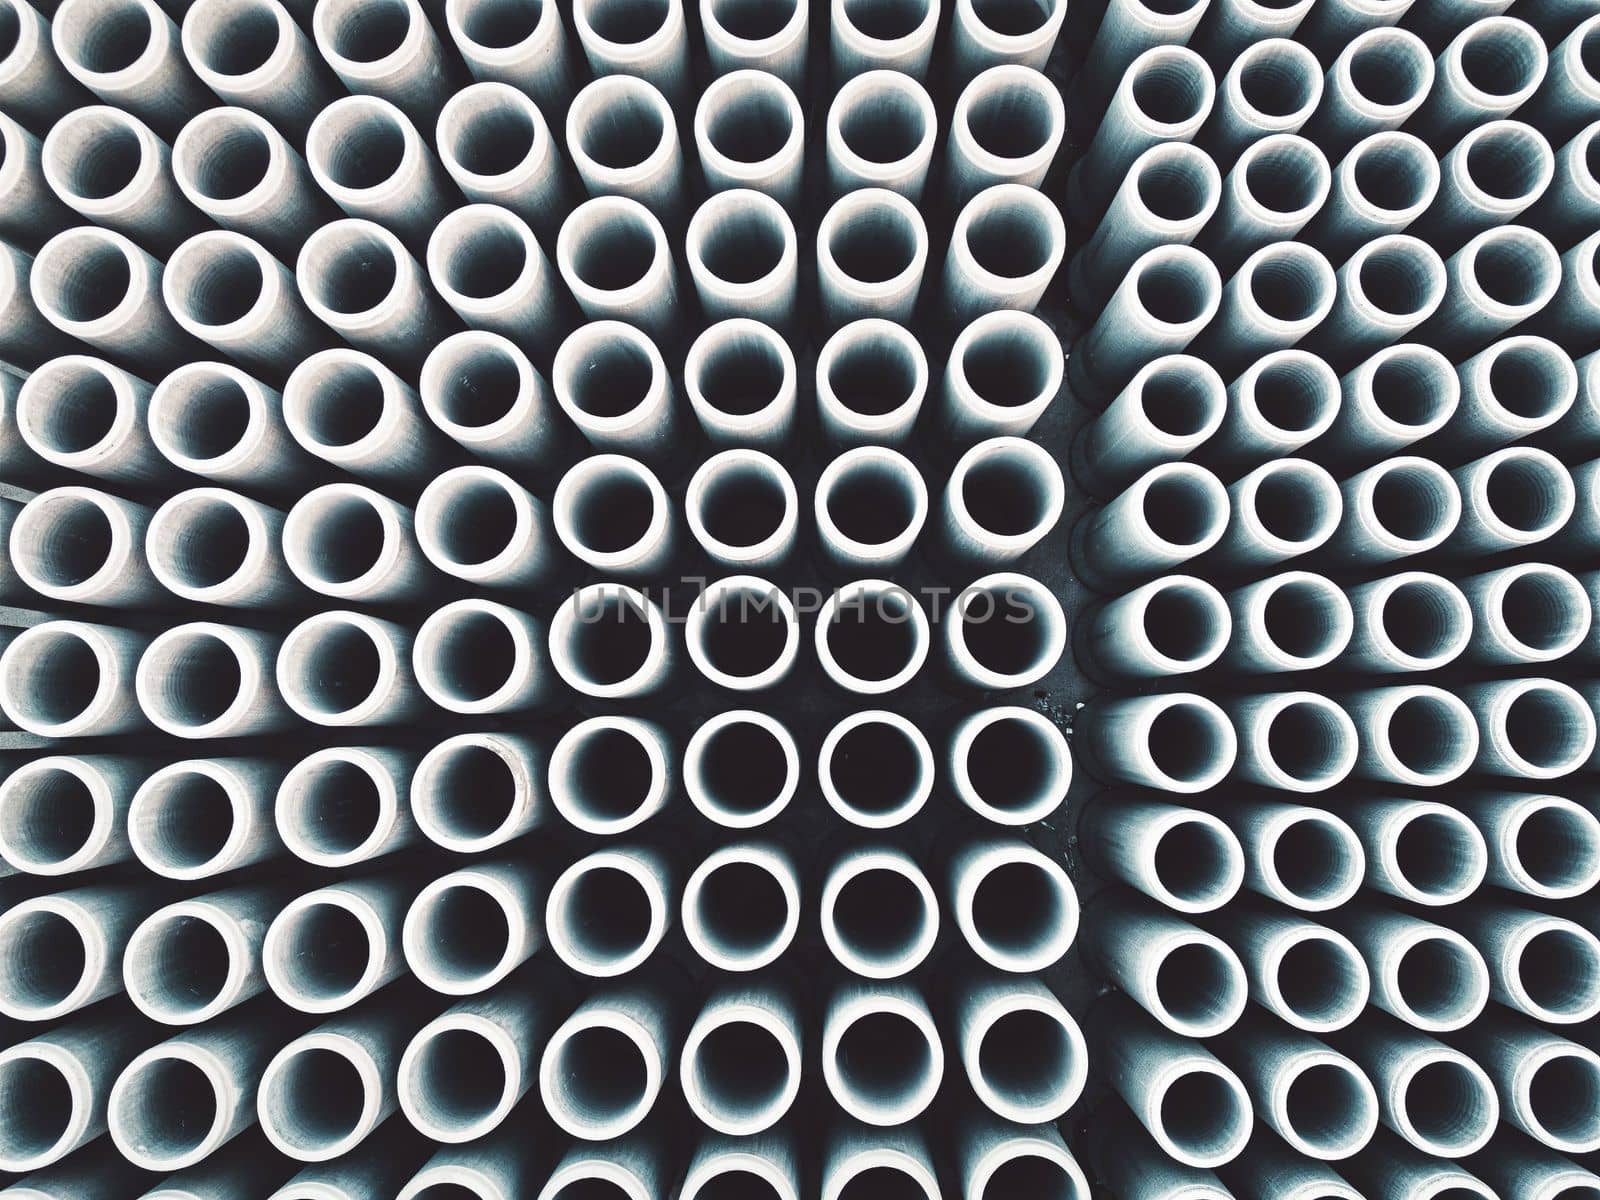 Top down view of round concrete pipes or pillars stacked in rows at the construction firm base by VisualProductions